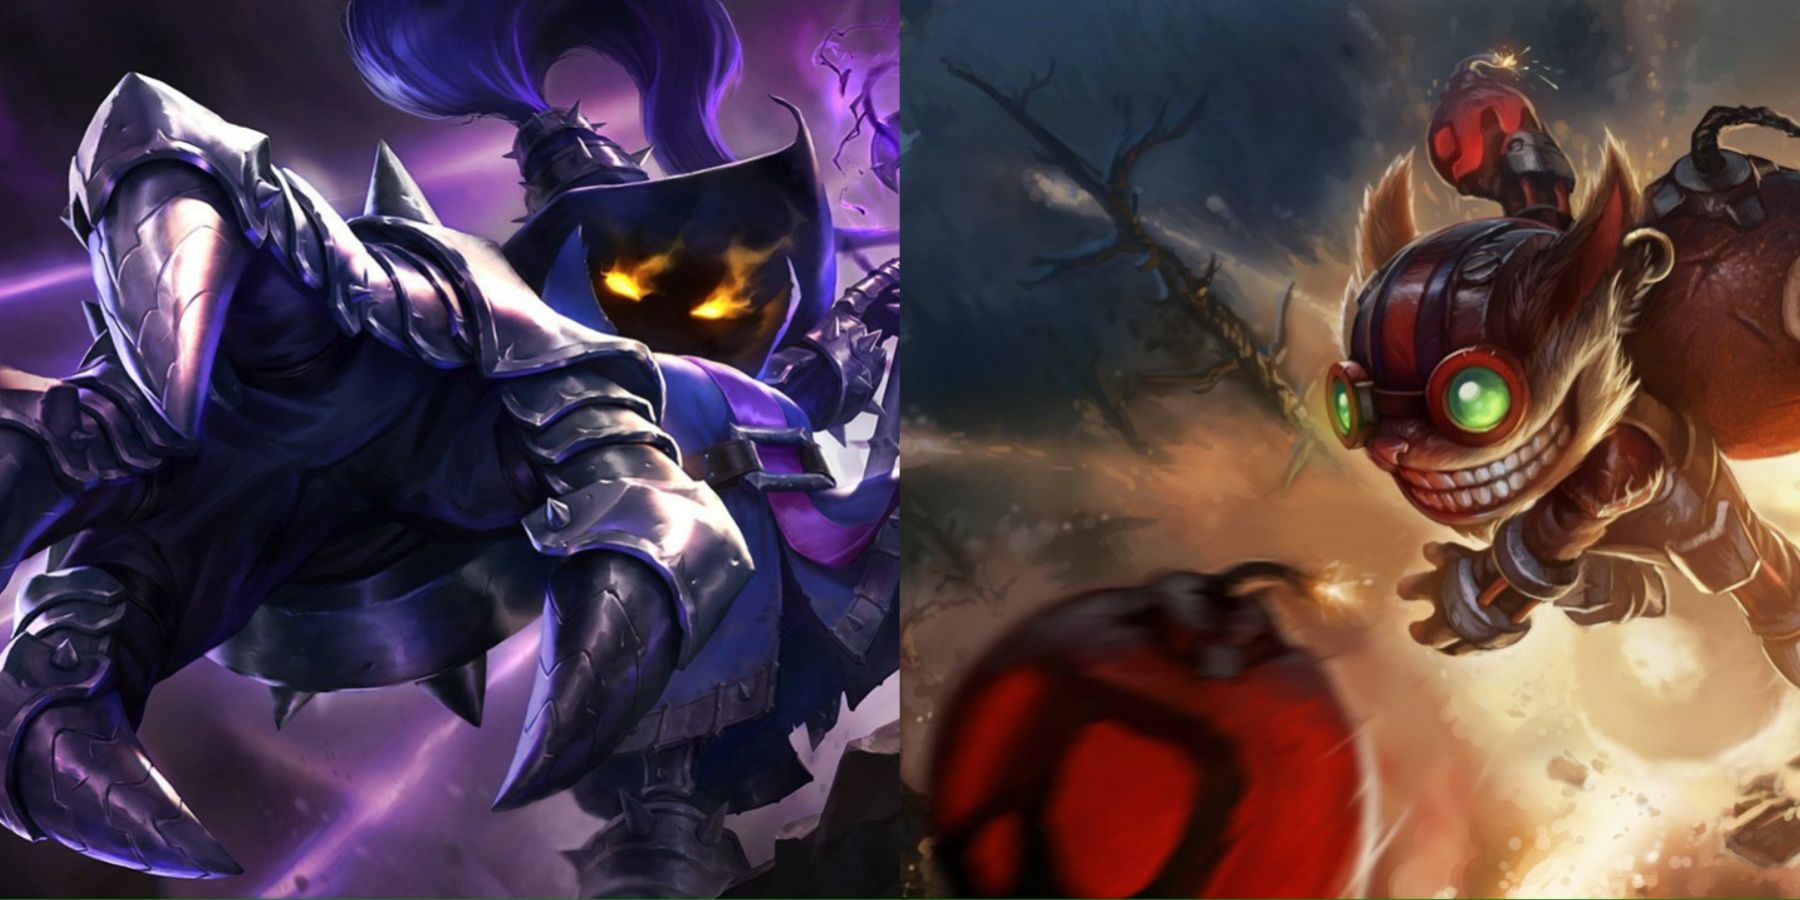 Veigar casting a spell and Ziggs throwing bomb in their League of Legends splash arts